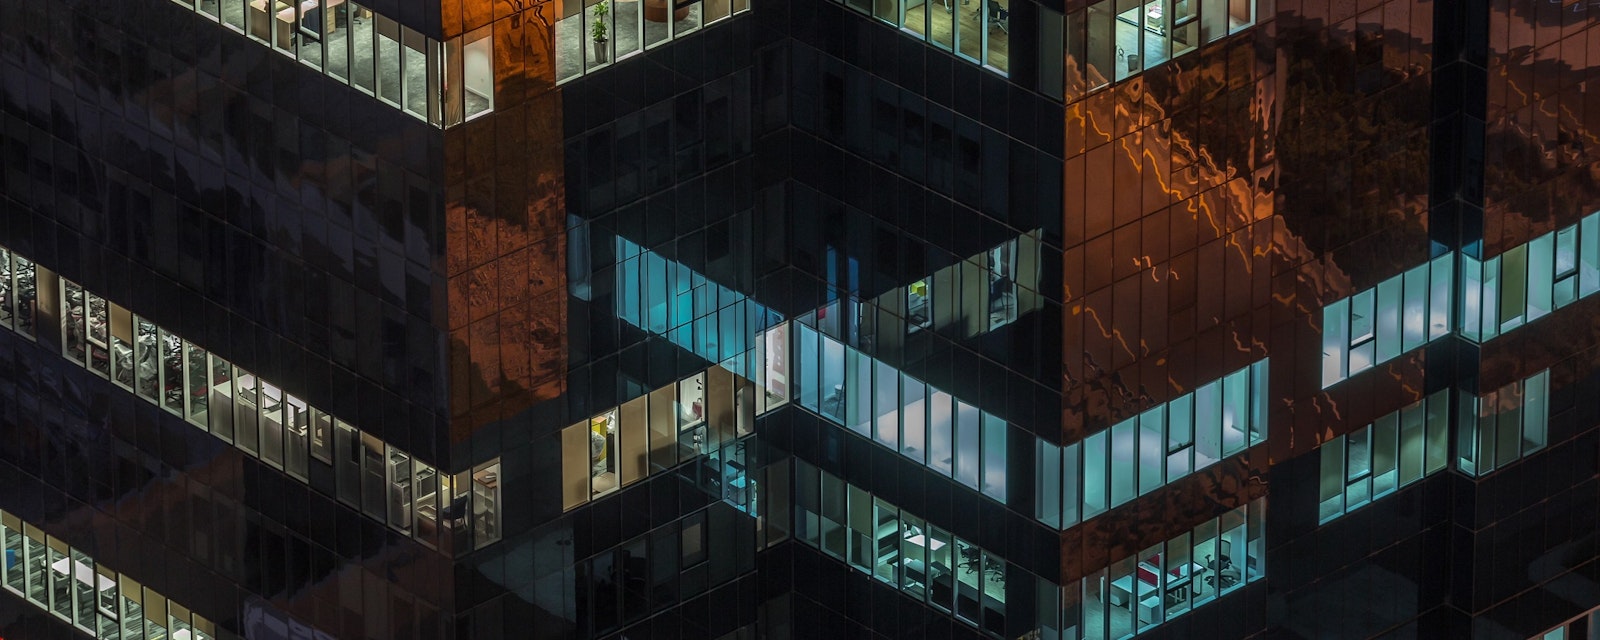 Windows,In,High-rise,Office,Building,In,The,Late,Evening,With